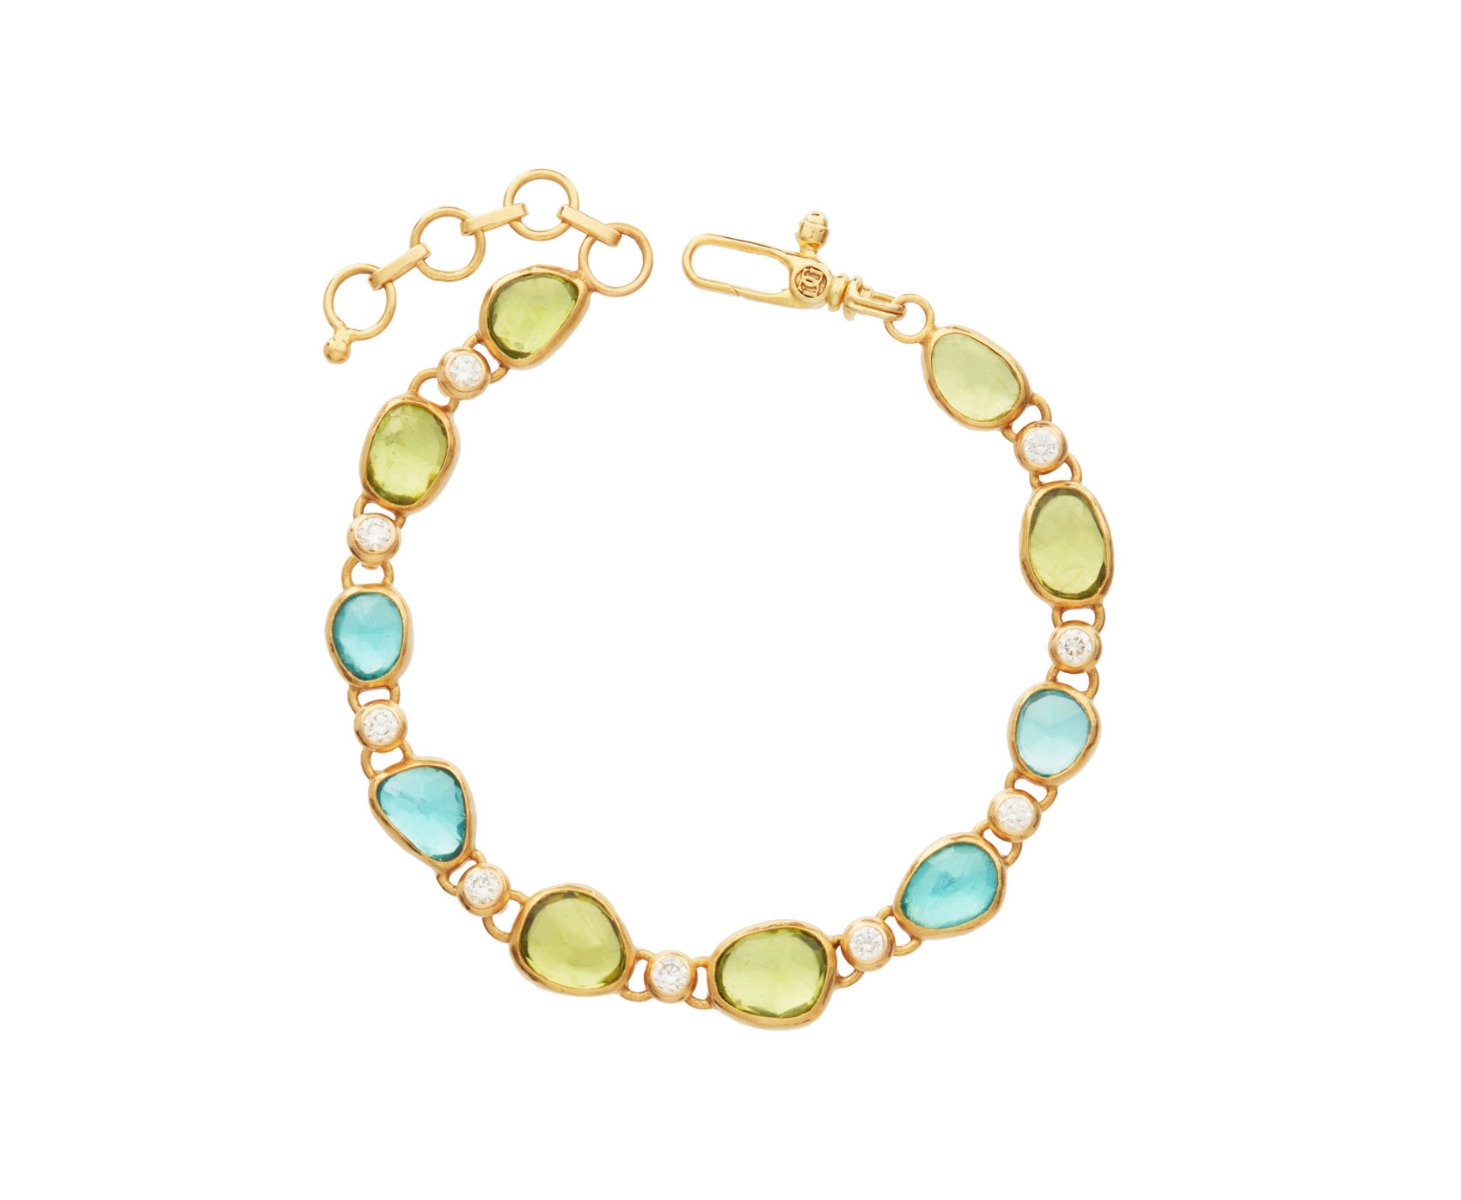 Gurhan One-Of-A-Kind "Elements" All-Round Statement Link Mixed Pastel Stones Bracelet
